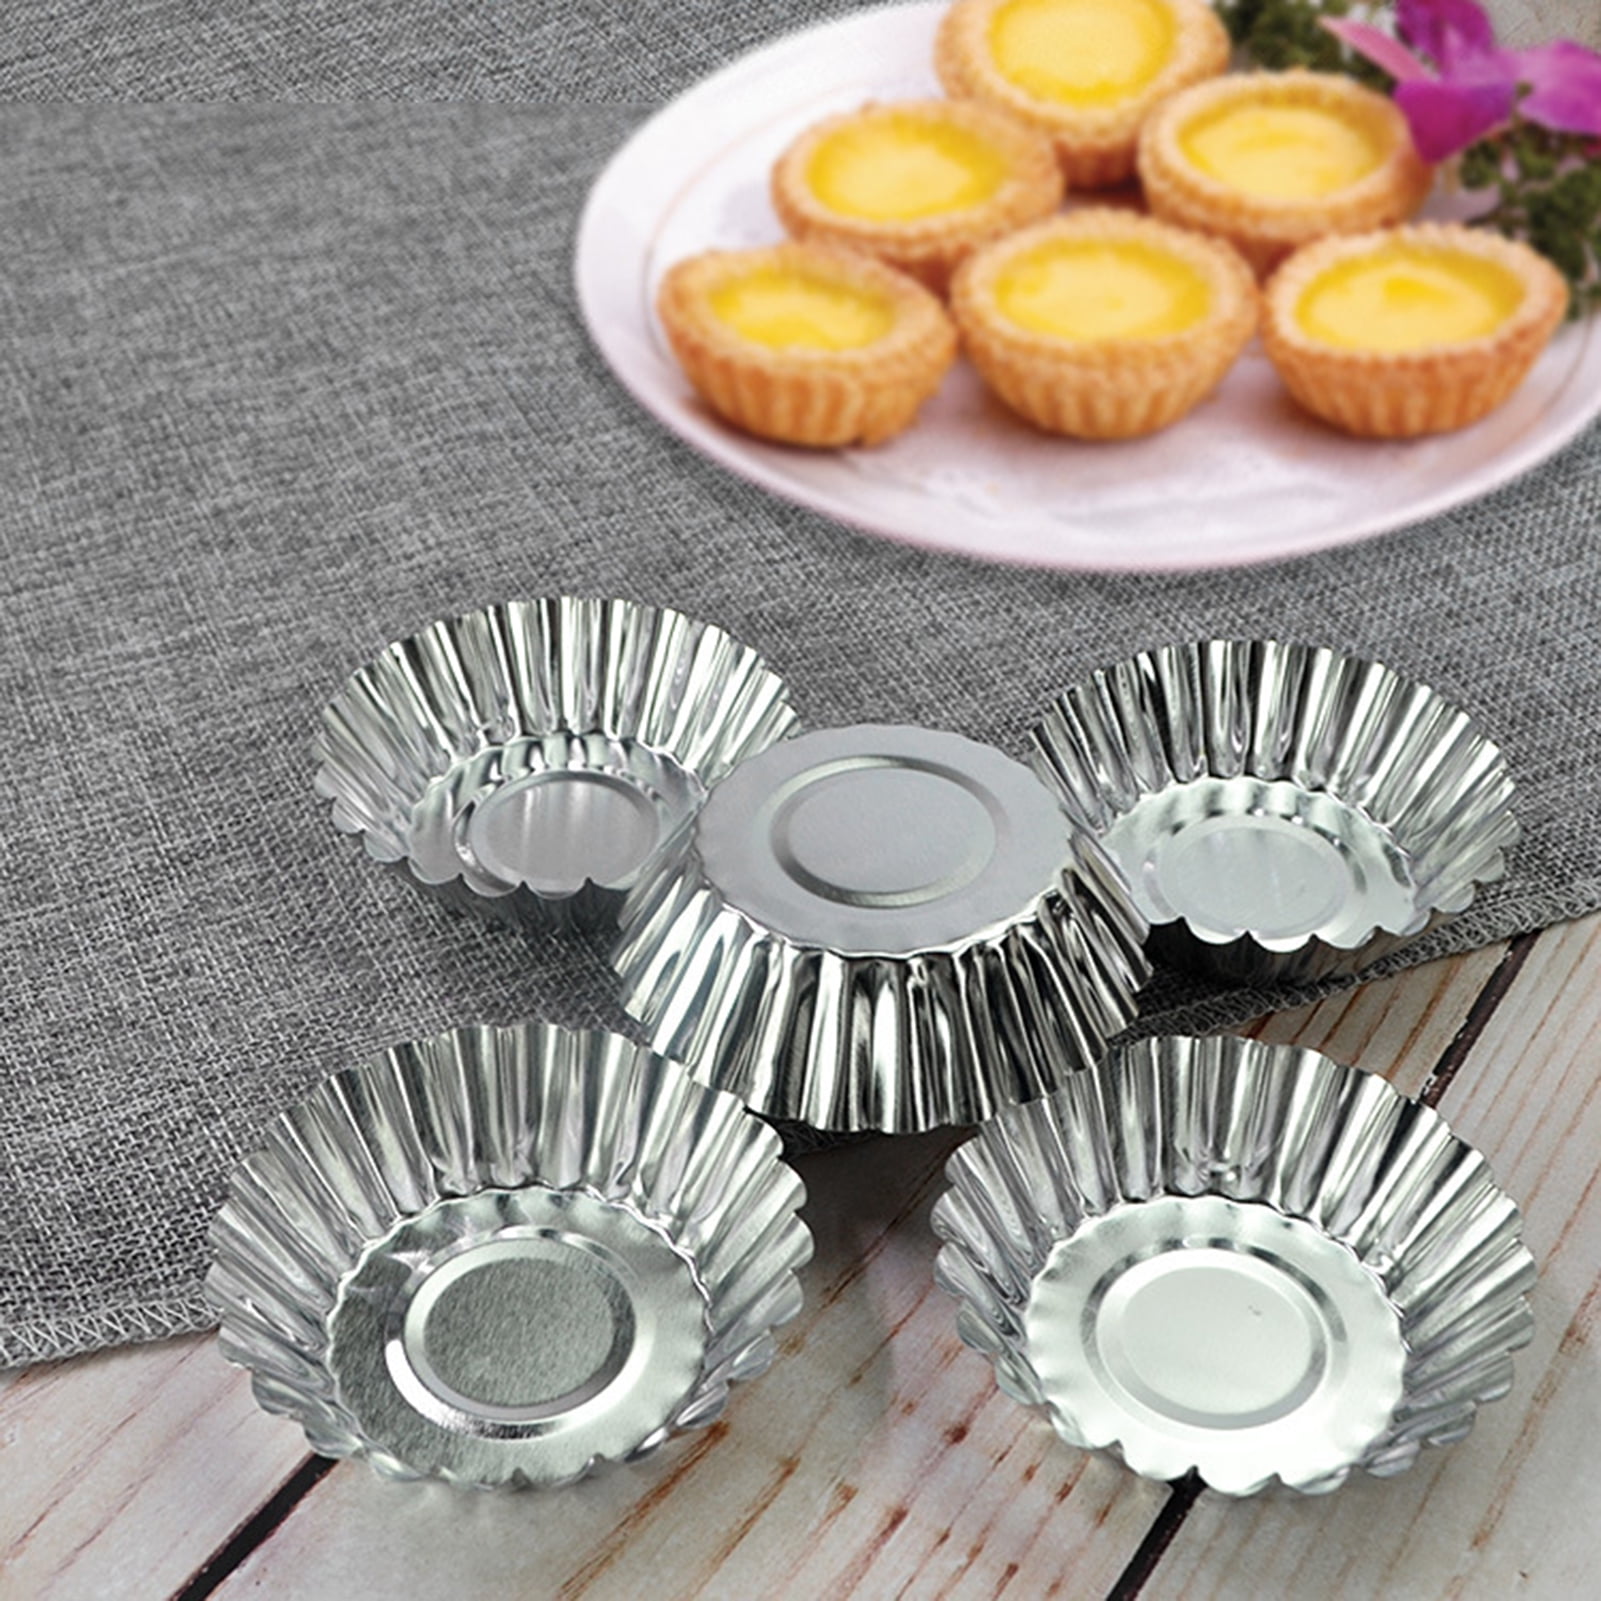 8 Pcs Egg Tart Mold Small Pie Pans Paper Cup Grilling Chocolate